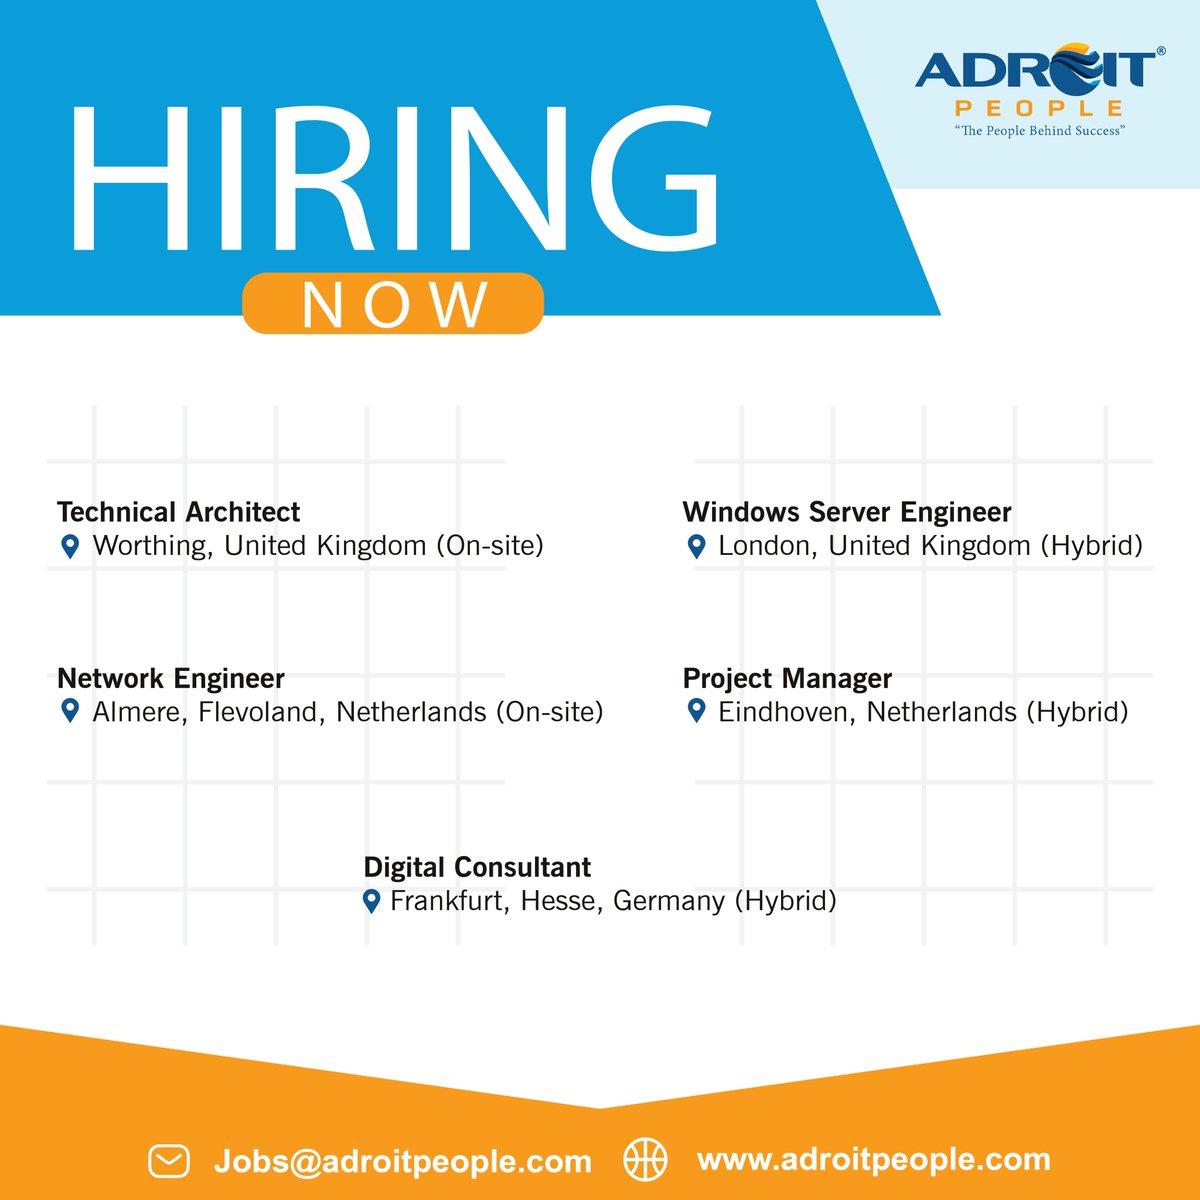 We have exciting job opportunities available in #multiplepositions across #Europe
Please send your resume to jobs@adroitpeople.com

#jobsinlondon #europejobs #netherlandsjobs #germanyjobs #frankfurt